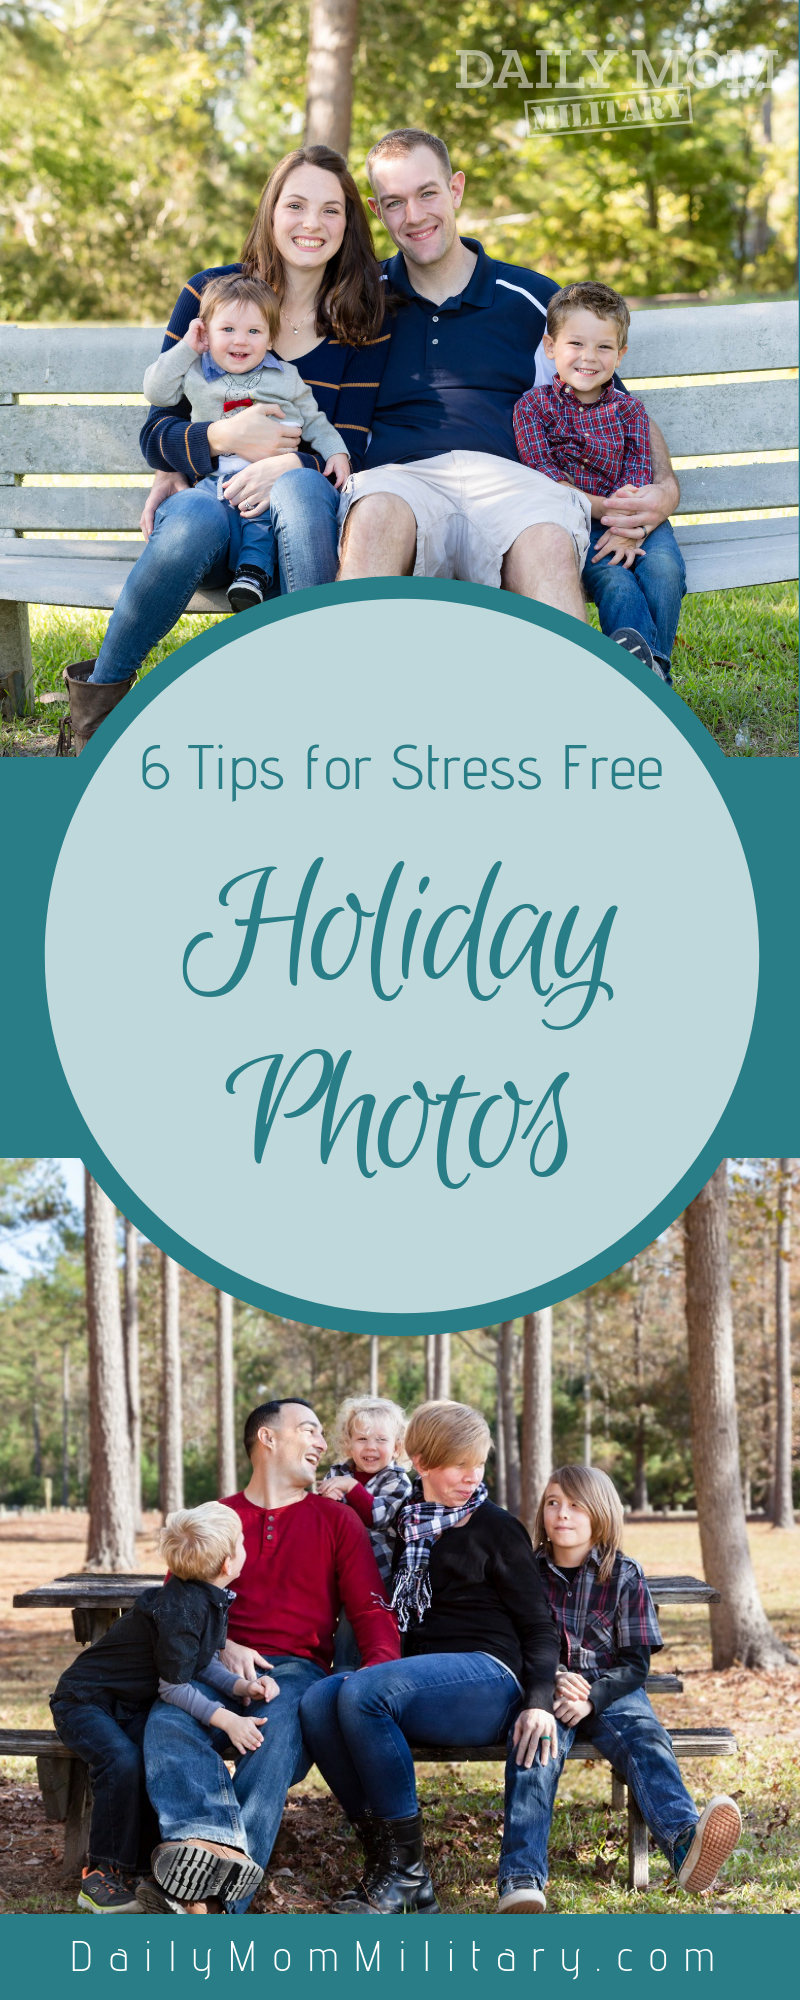 6 Tips For Stress-Free Holiday Photos